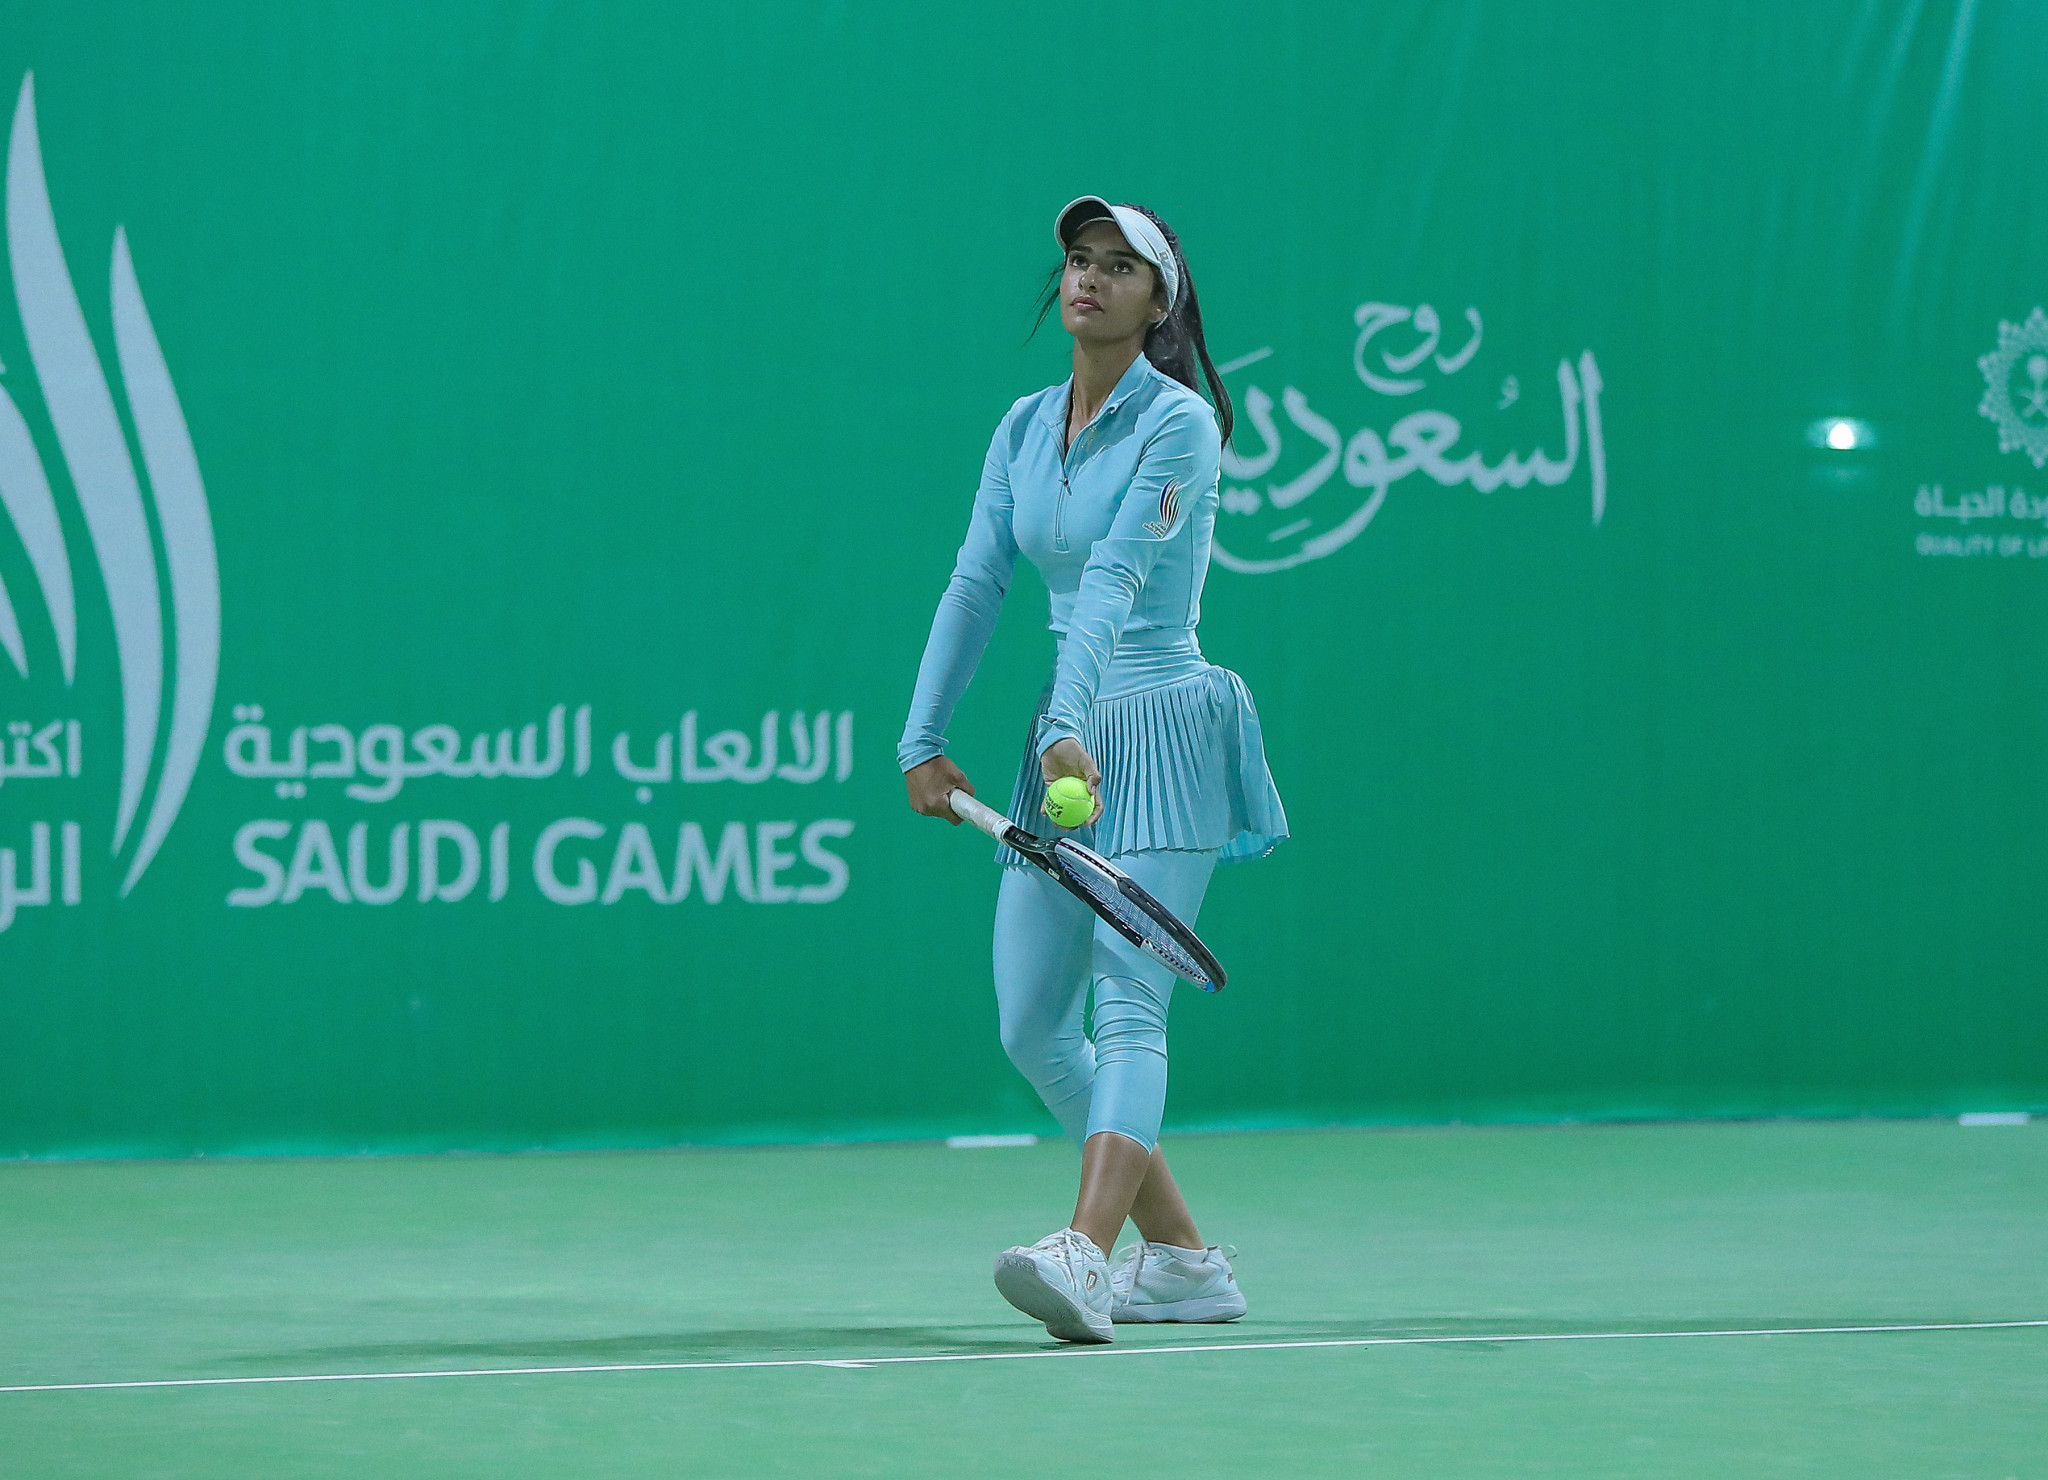 The first round of the women's singles tennis  was held during the evening ©Saudi Games